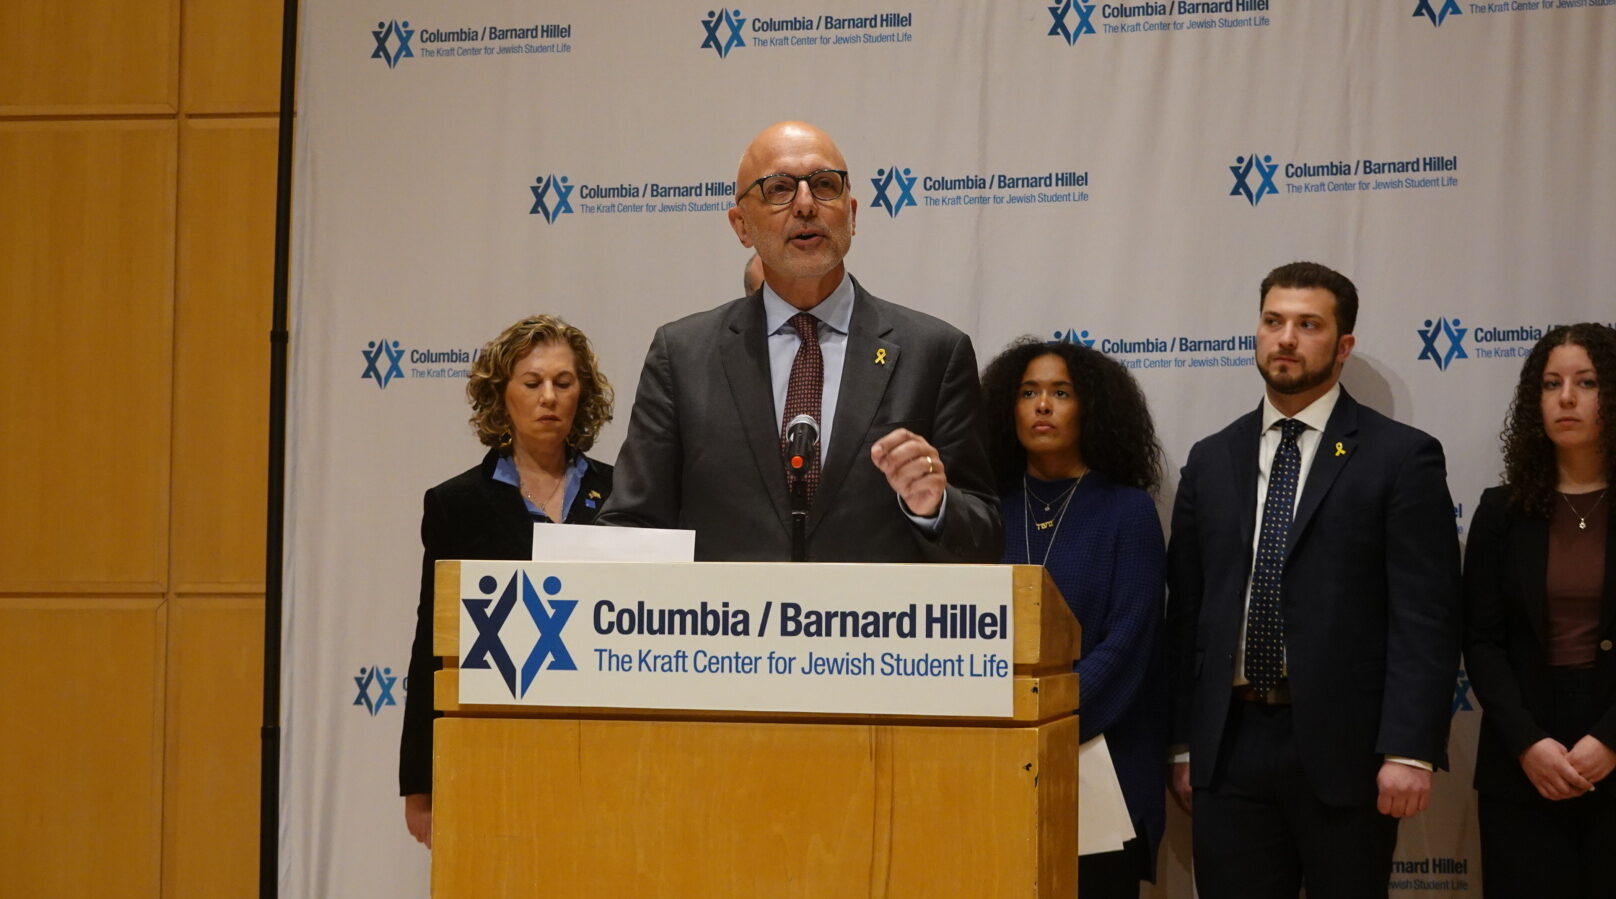 Threading a needle on free speech, Jewish leaders demand Columbia rein in pro-Palestinian protests